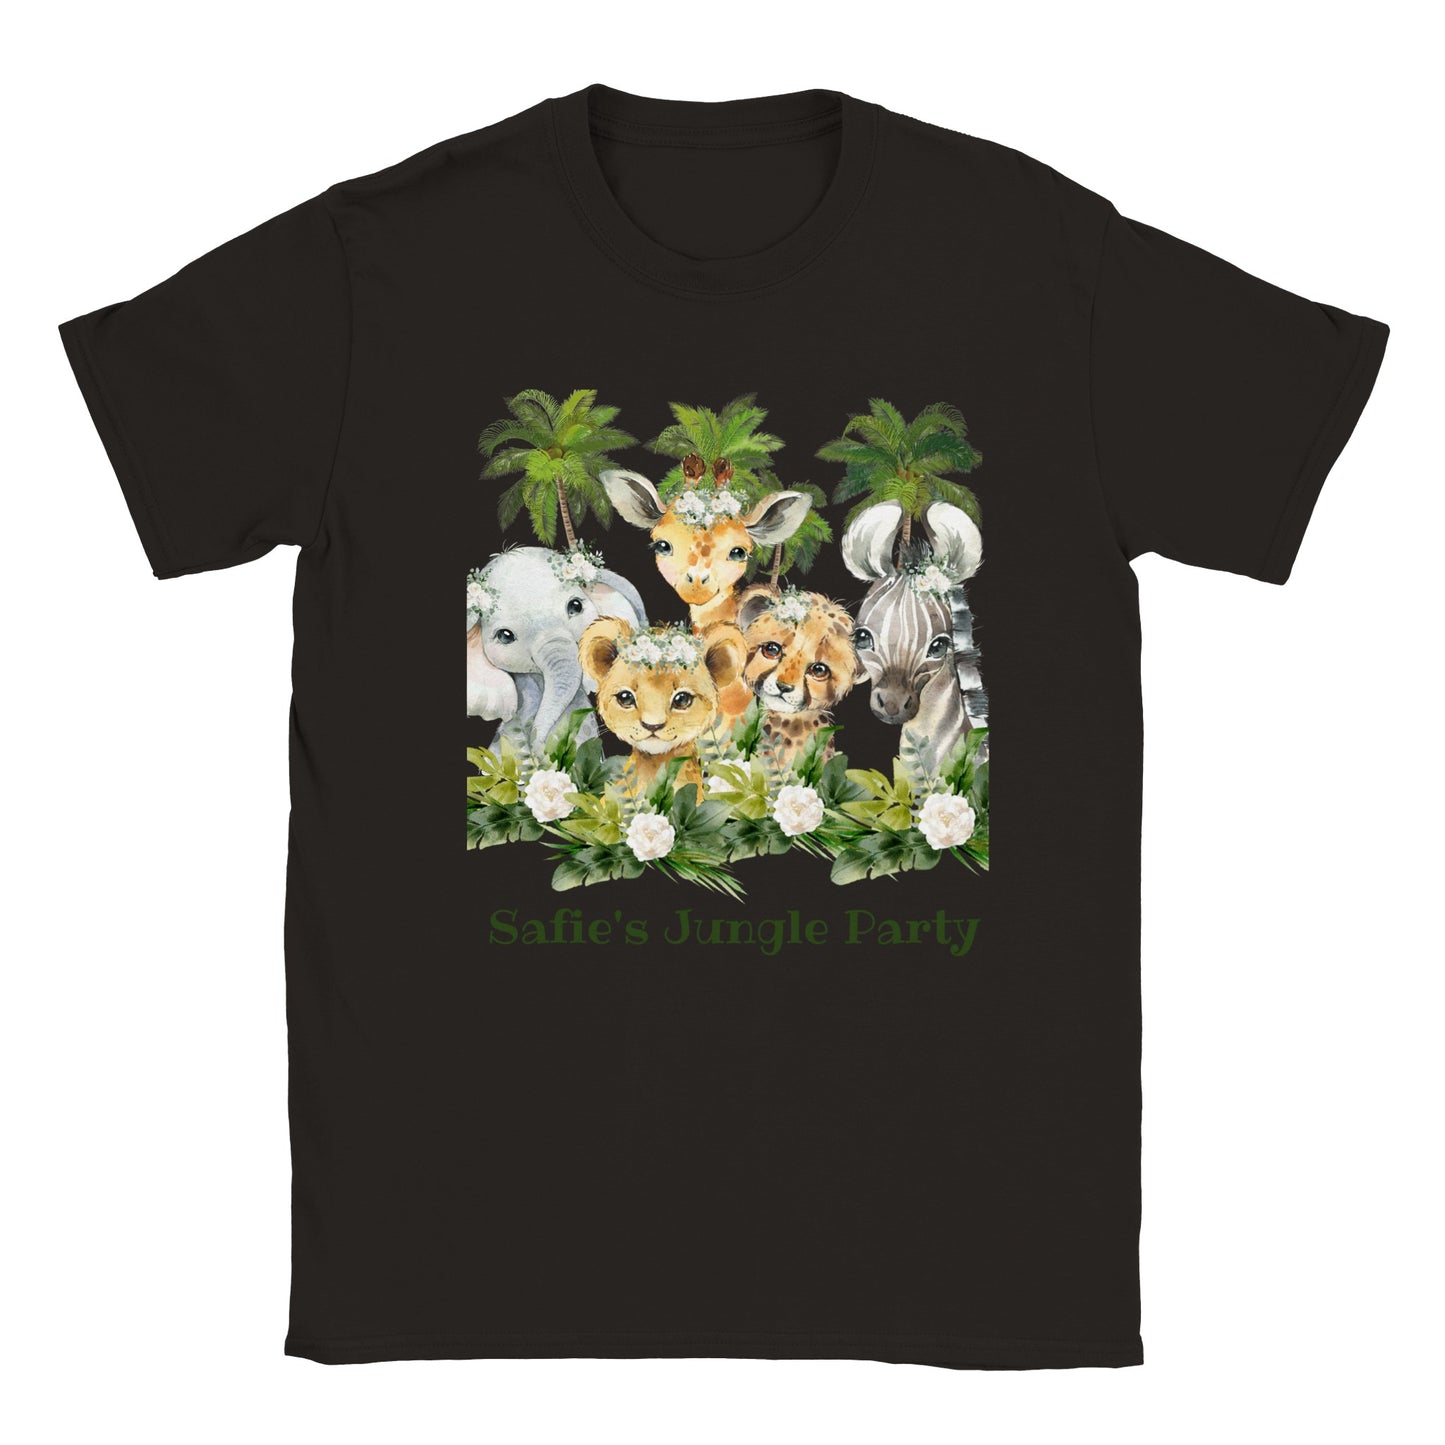 Personalizable, you can create a signature. Classic Kids Crewneck T-shirt "Jungle Party"